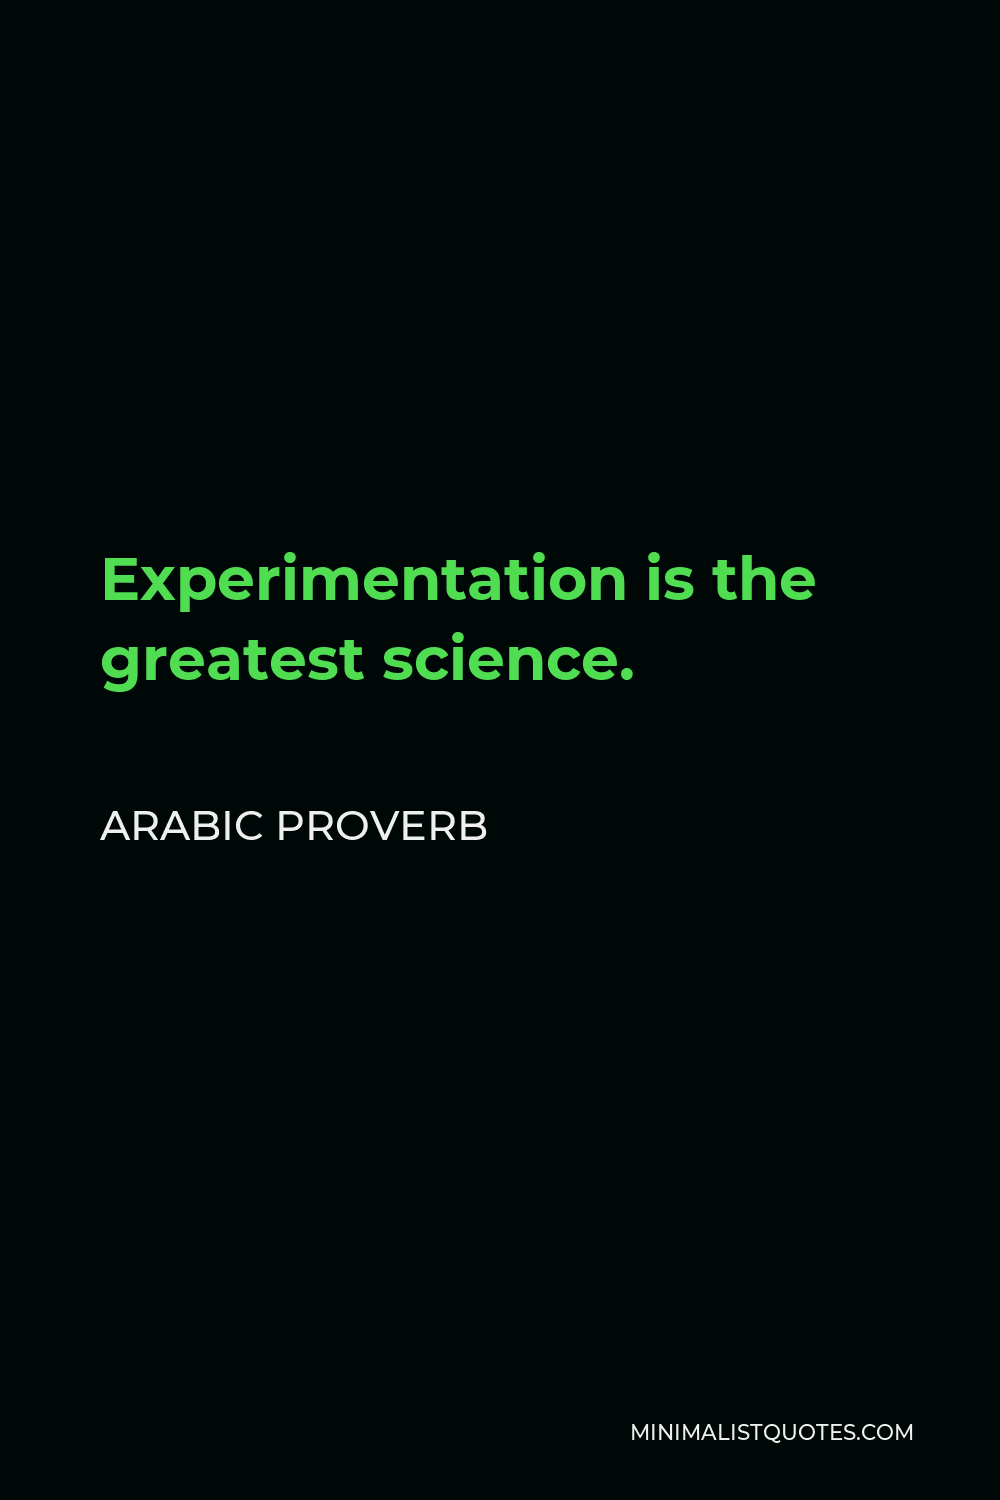 Arabic Proverb Quote - Experimentation is the greatest science.